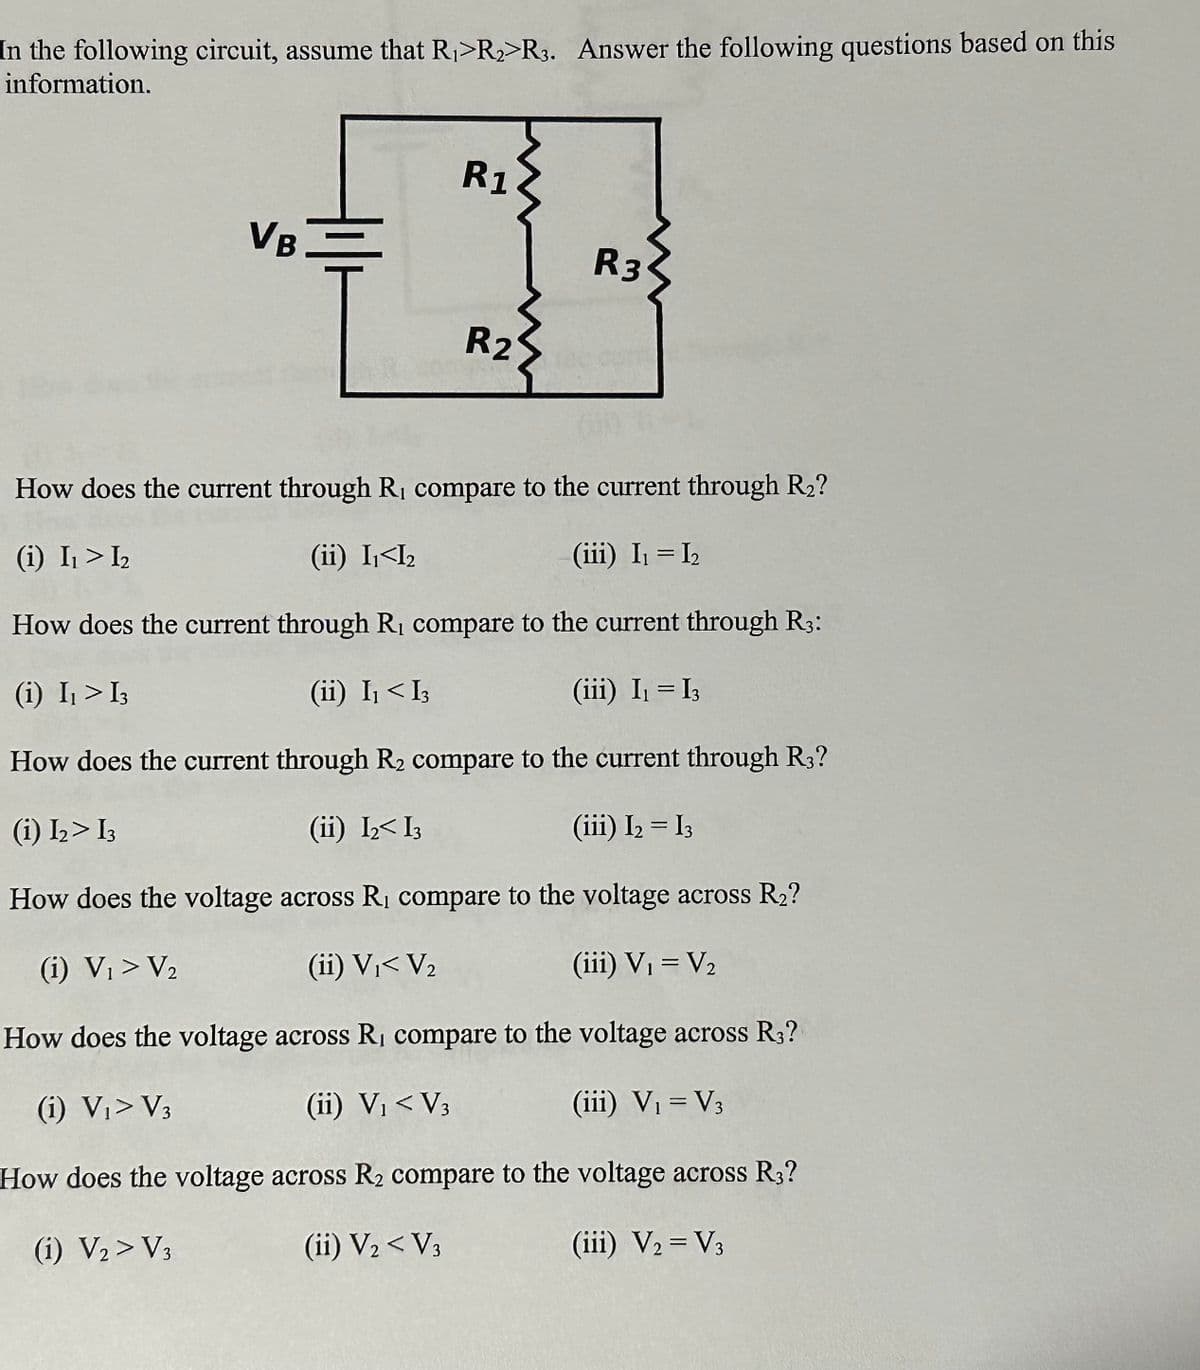 In the following circuit, assume that R₁ R₂ R3. Answer the following questions based on this
information.
VB
R1
R2
R3
How does the current through R, compare to the current through R₂?
(i) I₁ > I₂
(ii) I₁<I₂
(iii) I₁ = I₂
How does the current through R₁ compare to the current through R3:
(i) I₁ > 13
(ii) I₁ < I3
(iii) I₁ = I3
How does the current through R₂ compare to the current through R3?
(i) 1₂> I3
(ii) I₂ I3
(iii) I₂ = I3
How does the voltage across R₁ compare to the voltage across R₂?
(i) V₁ > V₂
(ii) V₁< V₂
(iii) V₁ = V₂
How does the voltage across R₁ compare to the voltage across R3?
(i) V₁> V3
(ii) V₁ < V3
(iii) V₁ = V3
How does the voltage across R₂ compare to the voltage across R3?
(1) V₂> V3
(ii) V₂ <V3
(iii) V2 = V3